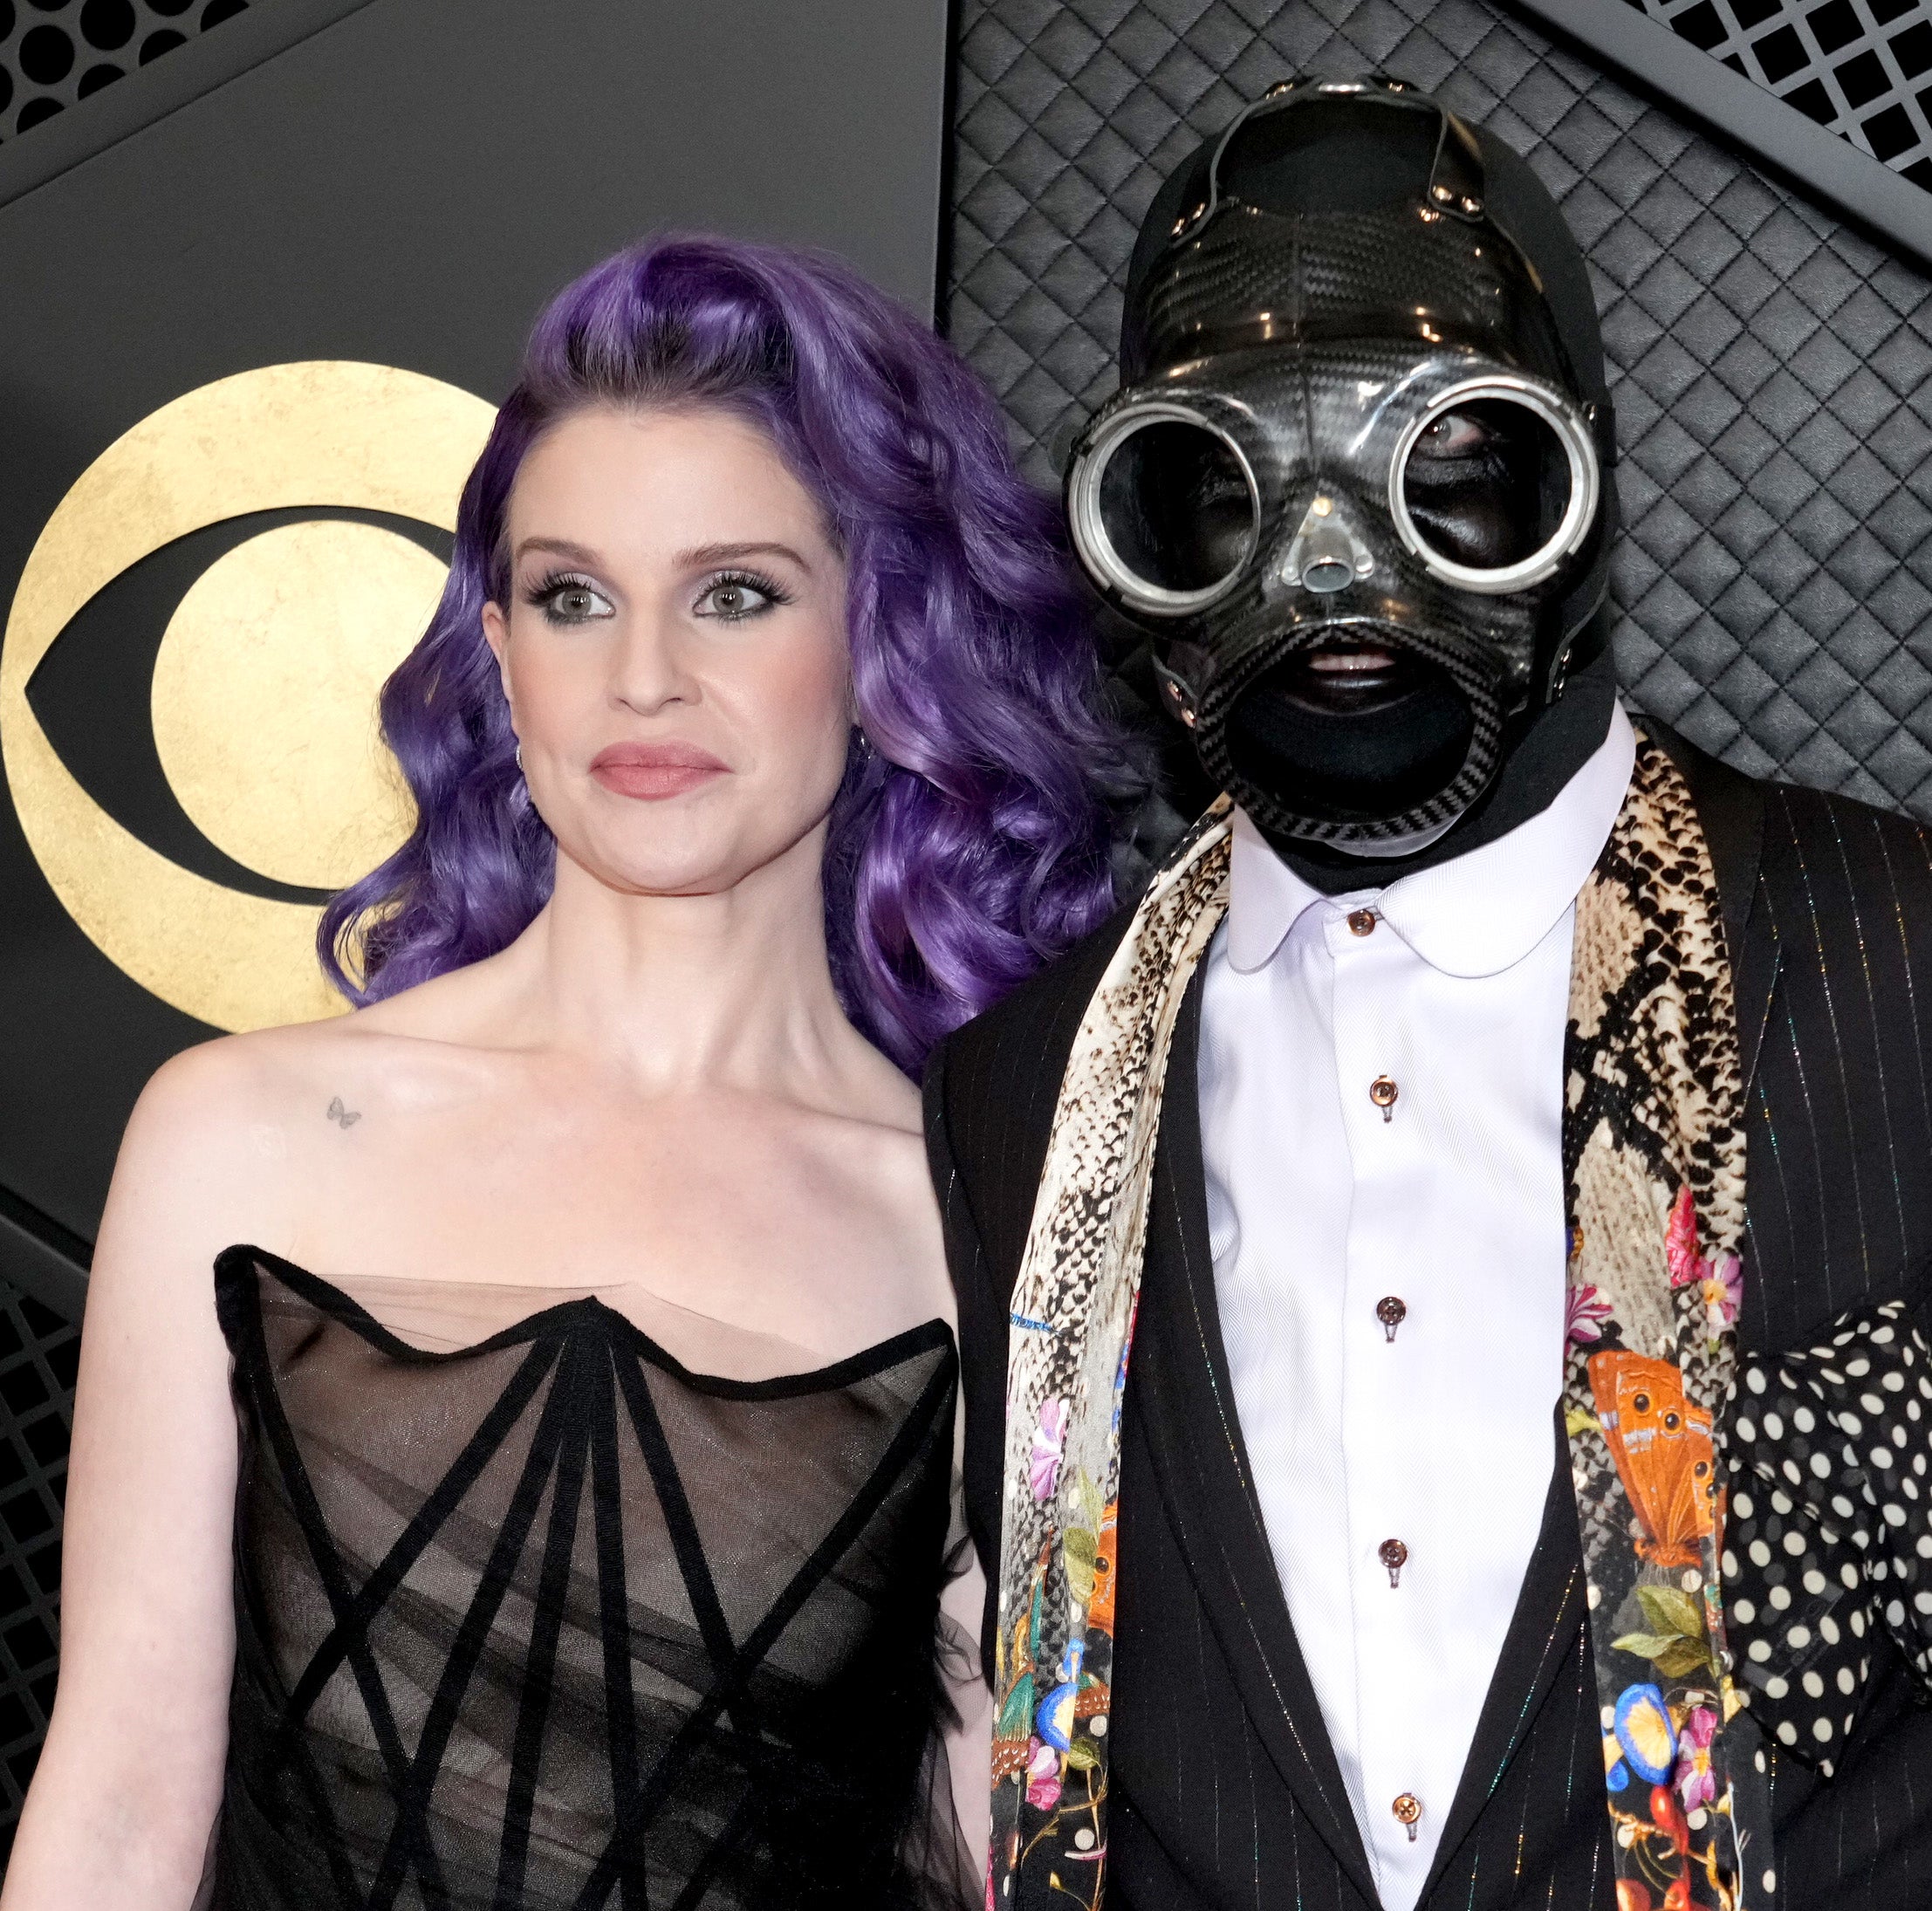 Two individuals posing, one in a black dress and purple hair, the other in a suit with a patterned design and wearing a gas mask